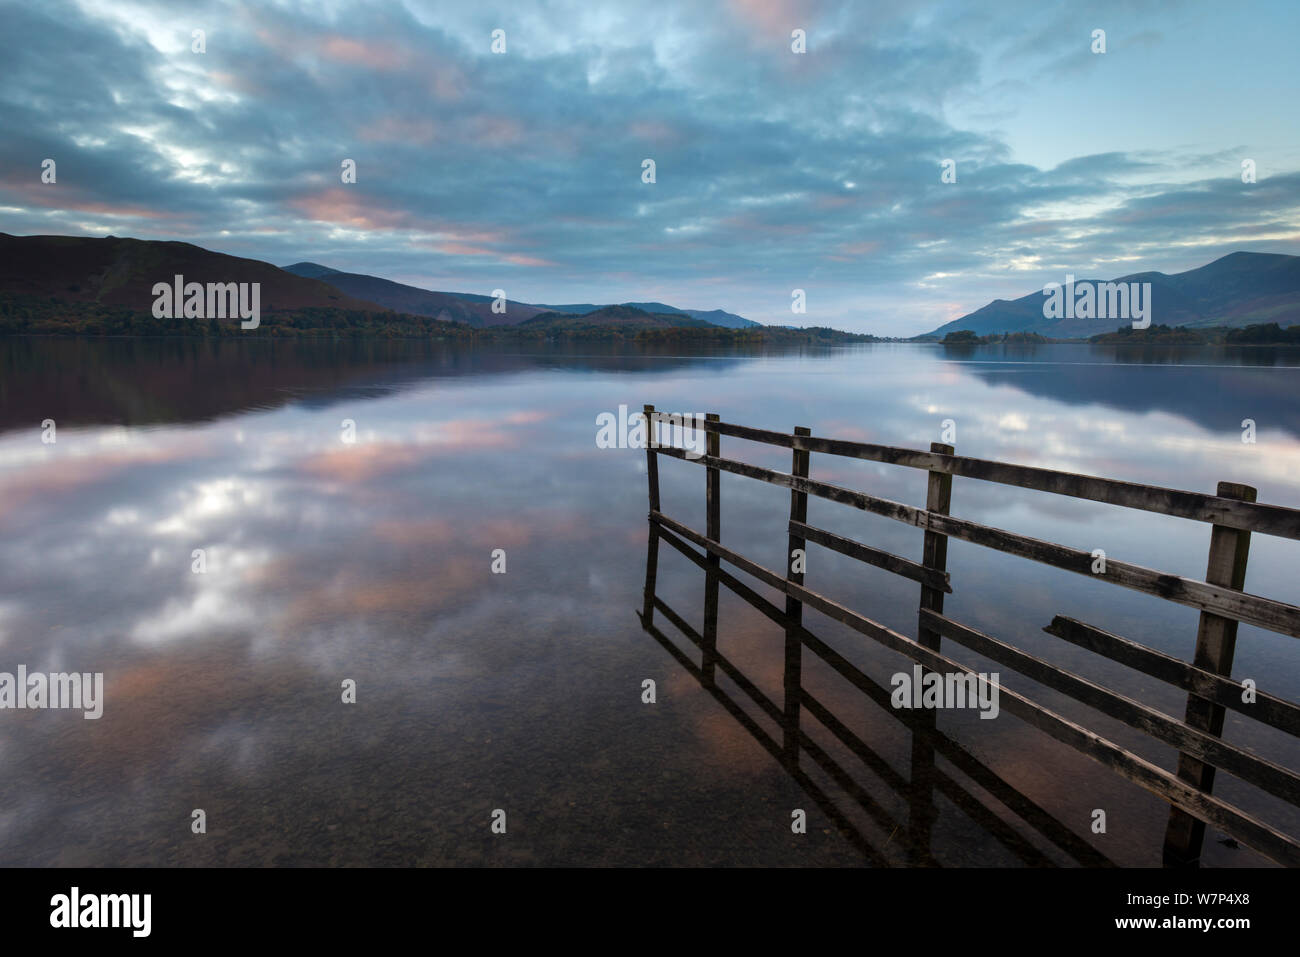 Derwent Water, fence with flooding at sunset, near Keswick, The Lake District, Cumbria, UK. October 2012. Stock Photo